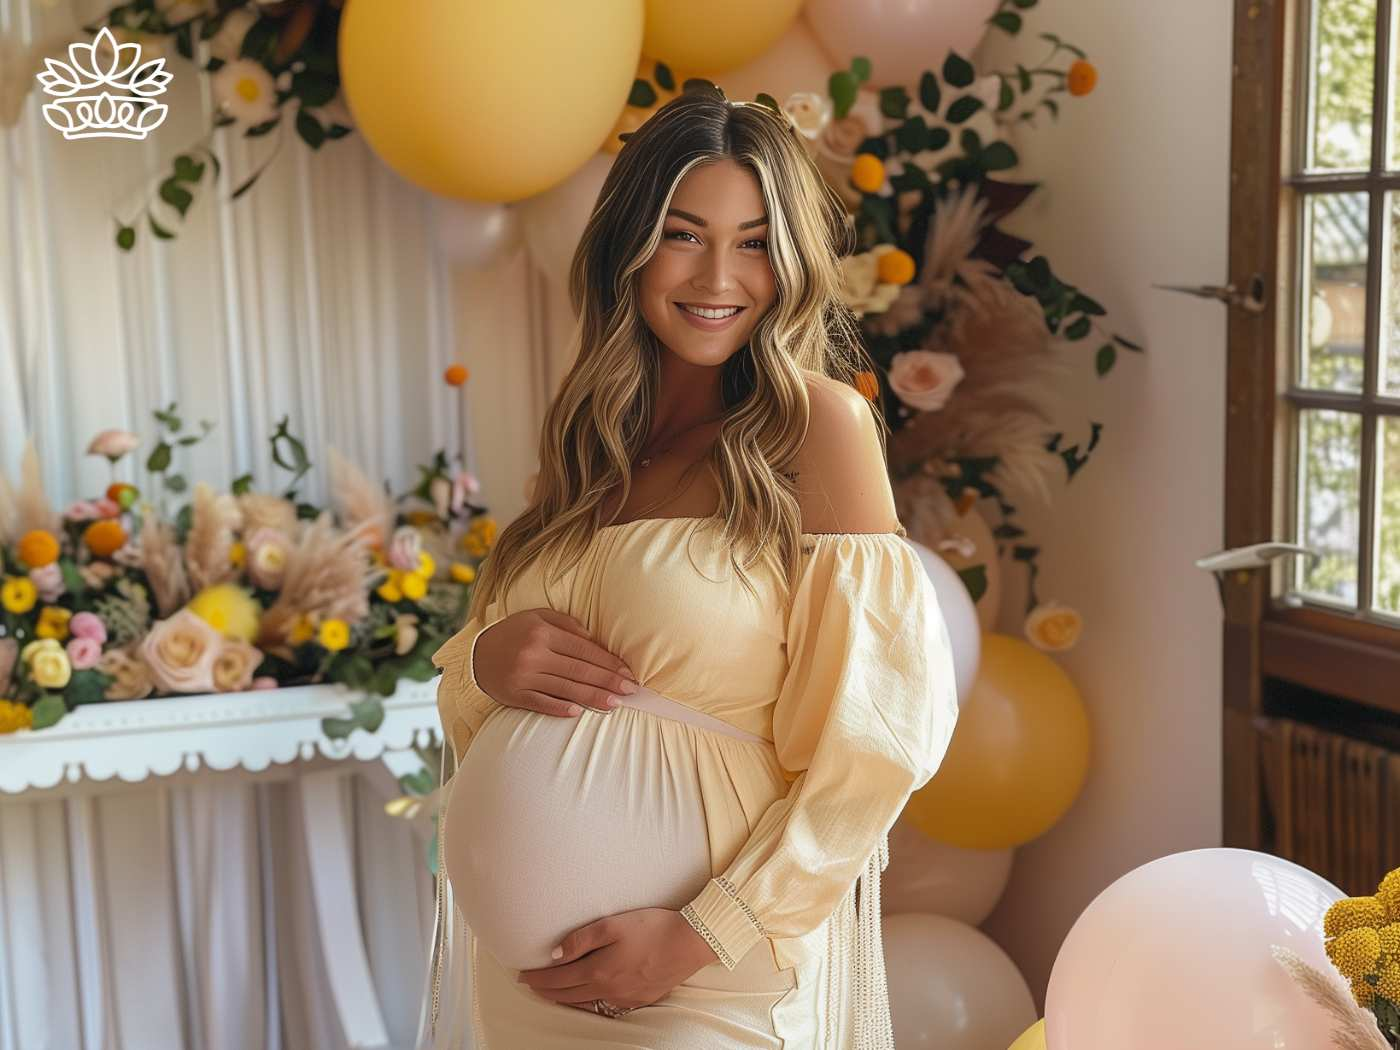 Beaming pregnant woman in a soft yellow dress embracing her belly, surrounded by a whimsical arrangement of sunny blooms and balloons, epitomising Fabulous Flowers and Gifts.